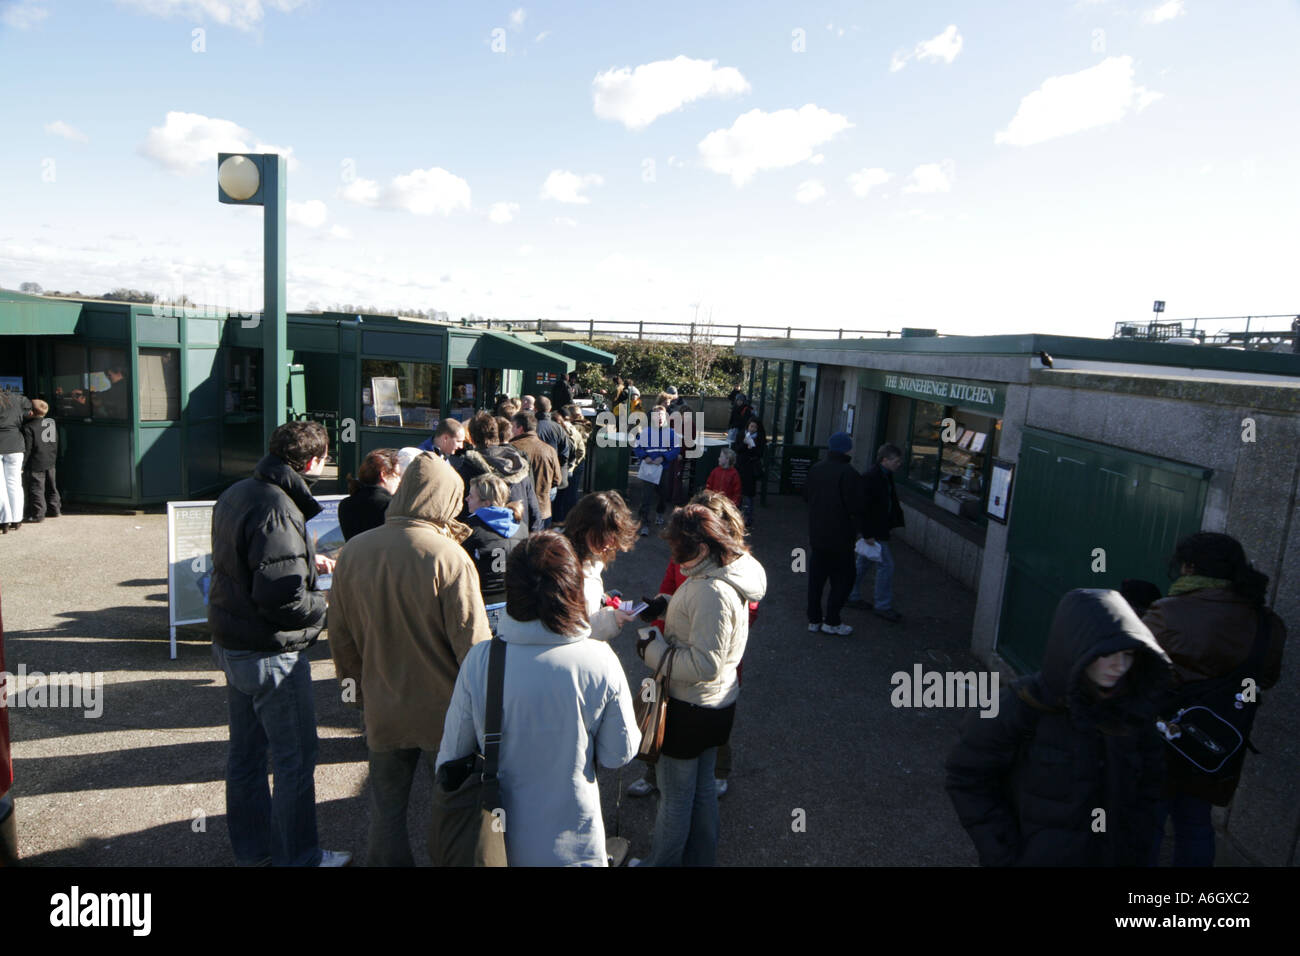 Stonehenge Salisbury Plain Wiltshire England World Heritage Site Queue to get in enter entrance tunnel poor visitor facilities Stock Photo